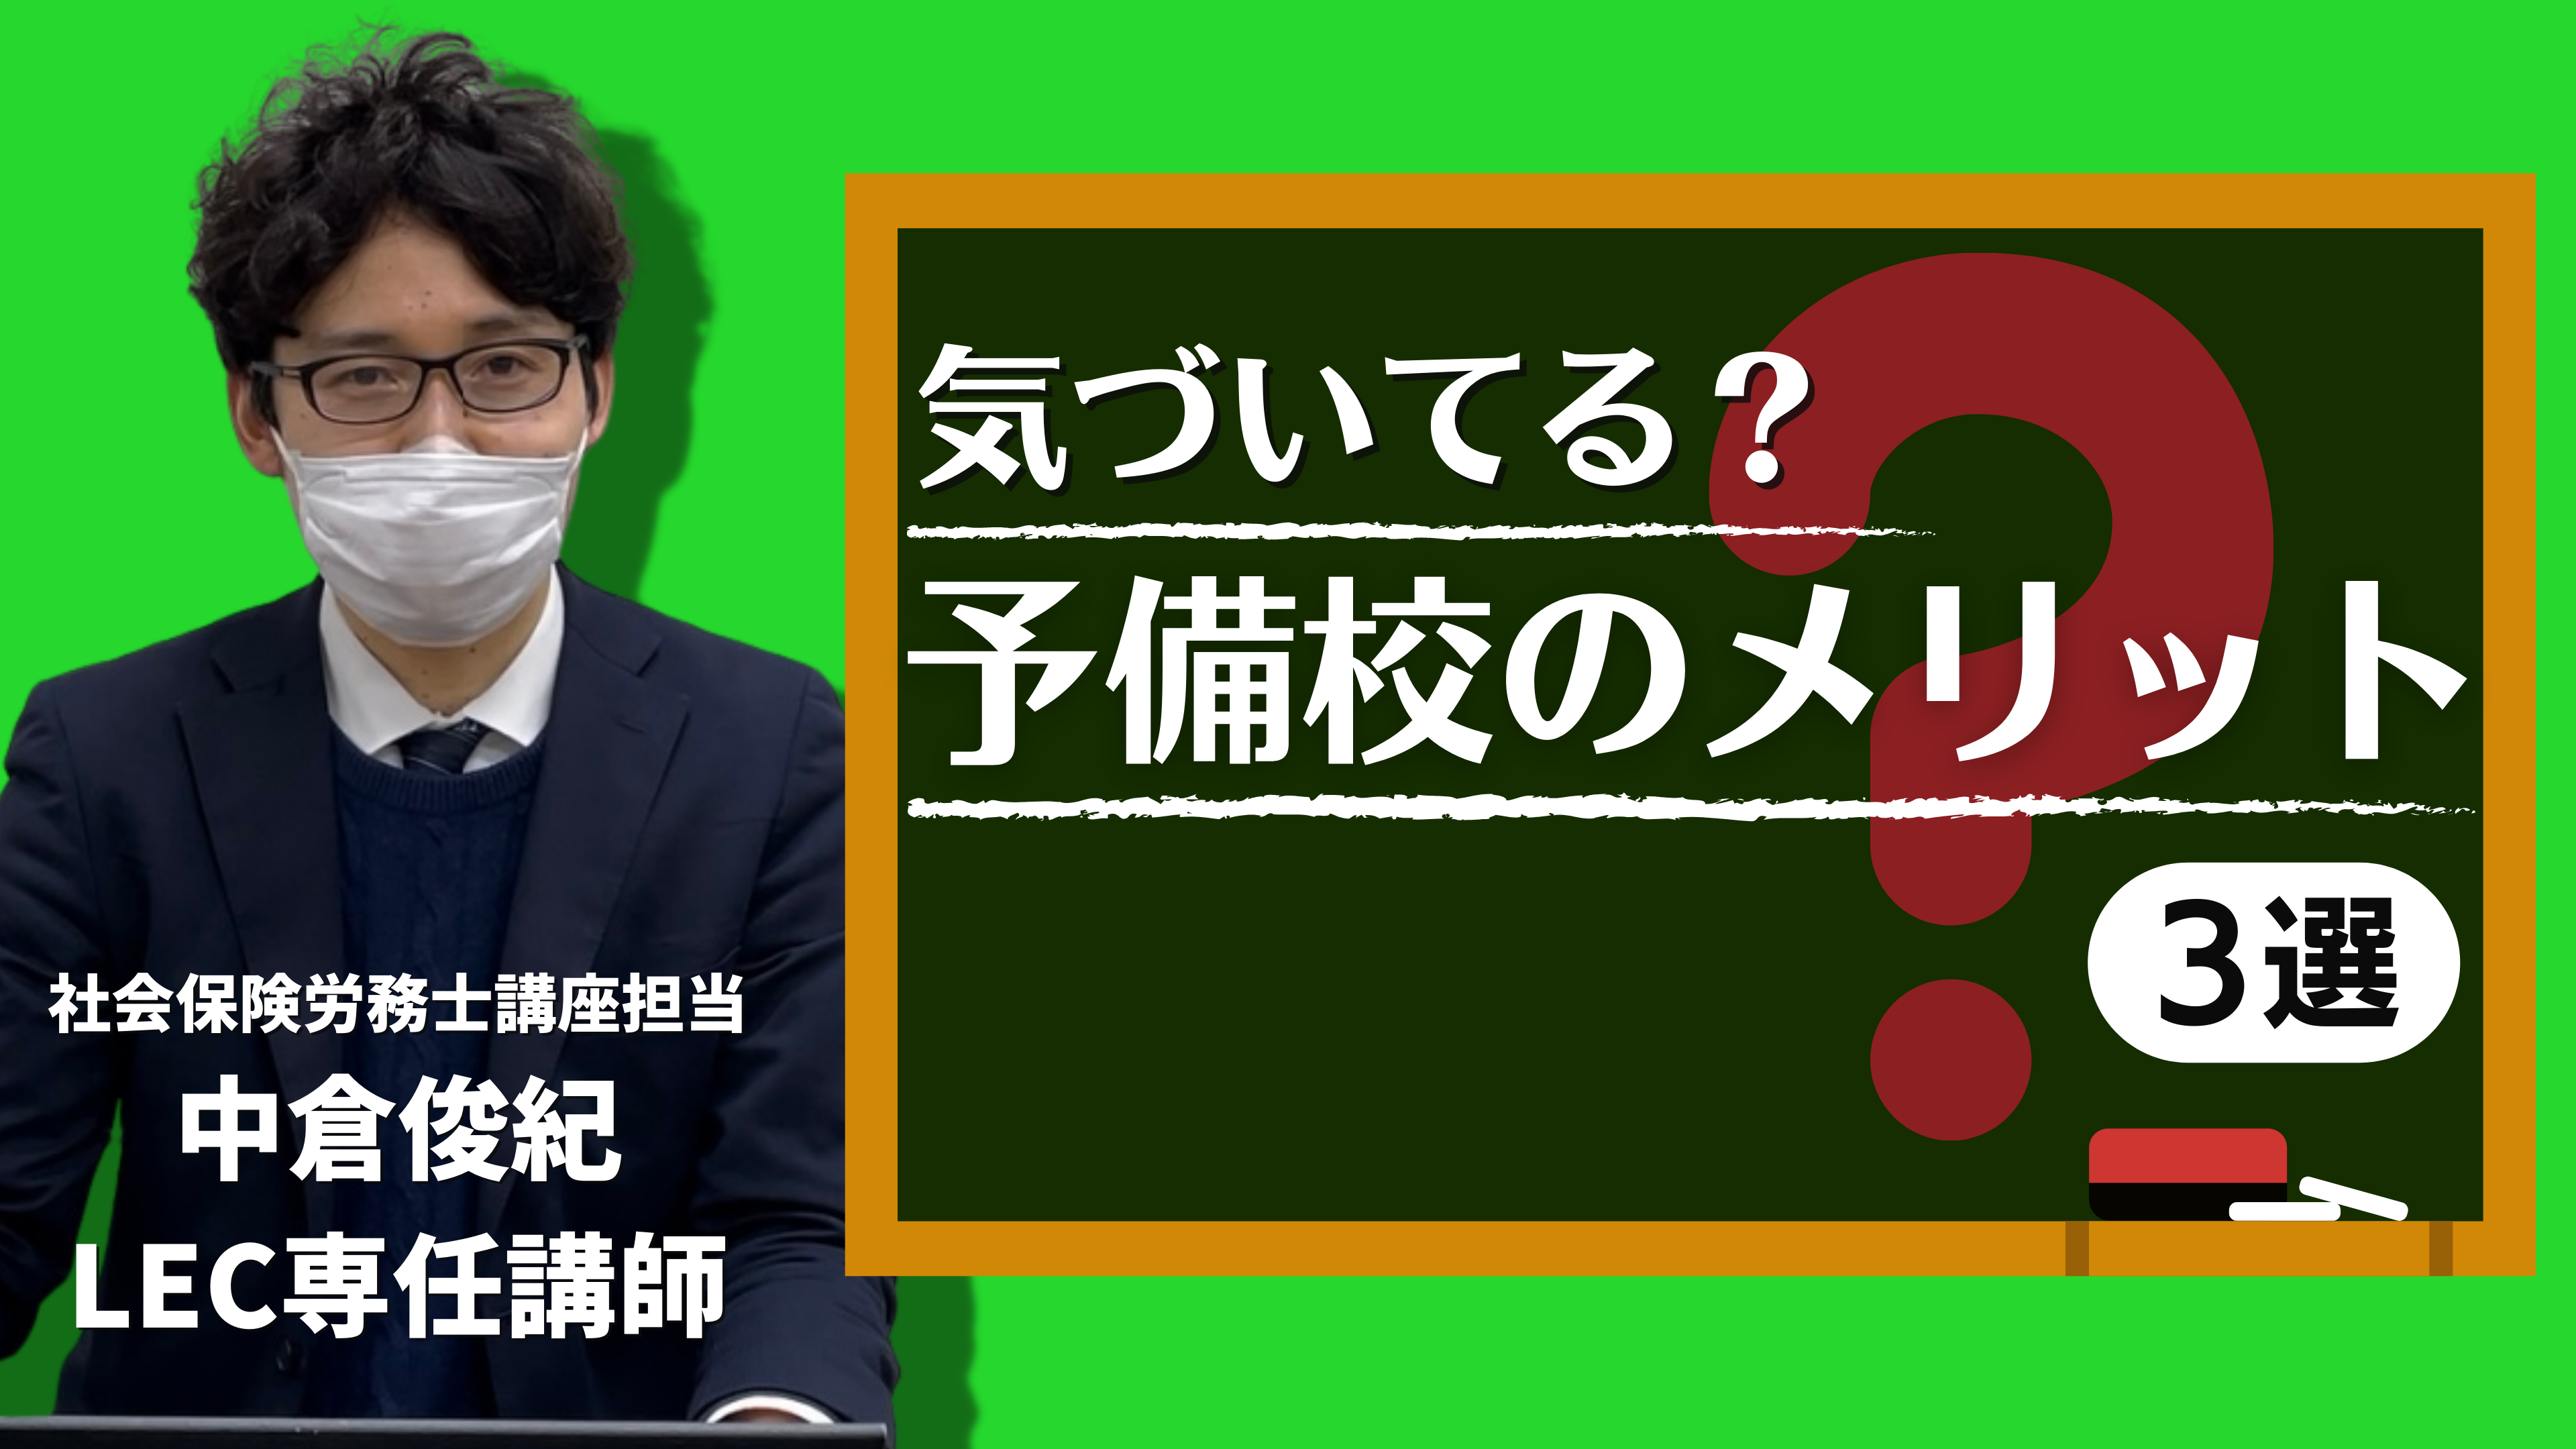 LEC 岡山本校　中倉講師サムネ.png